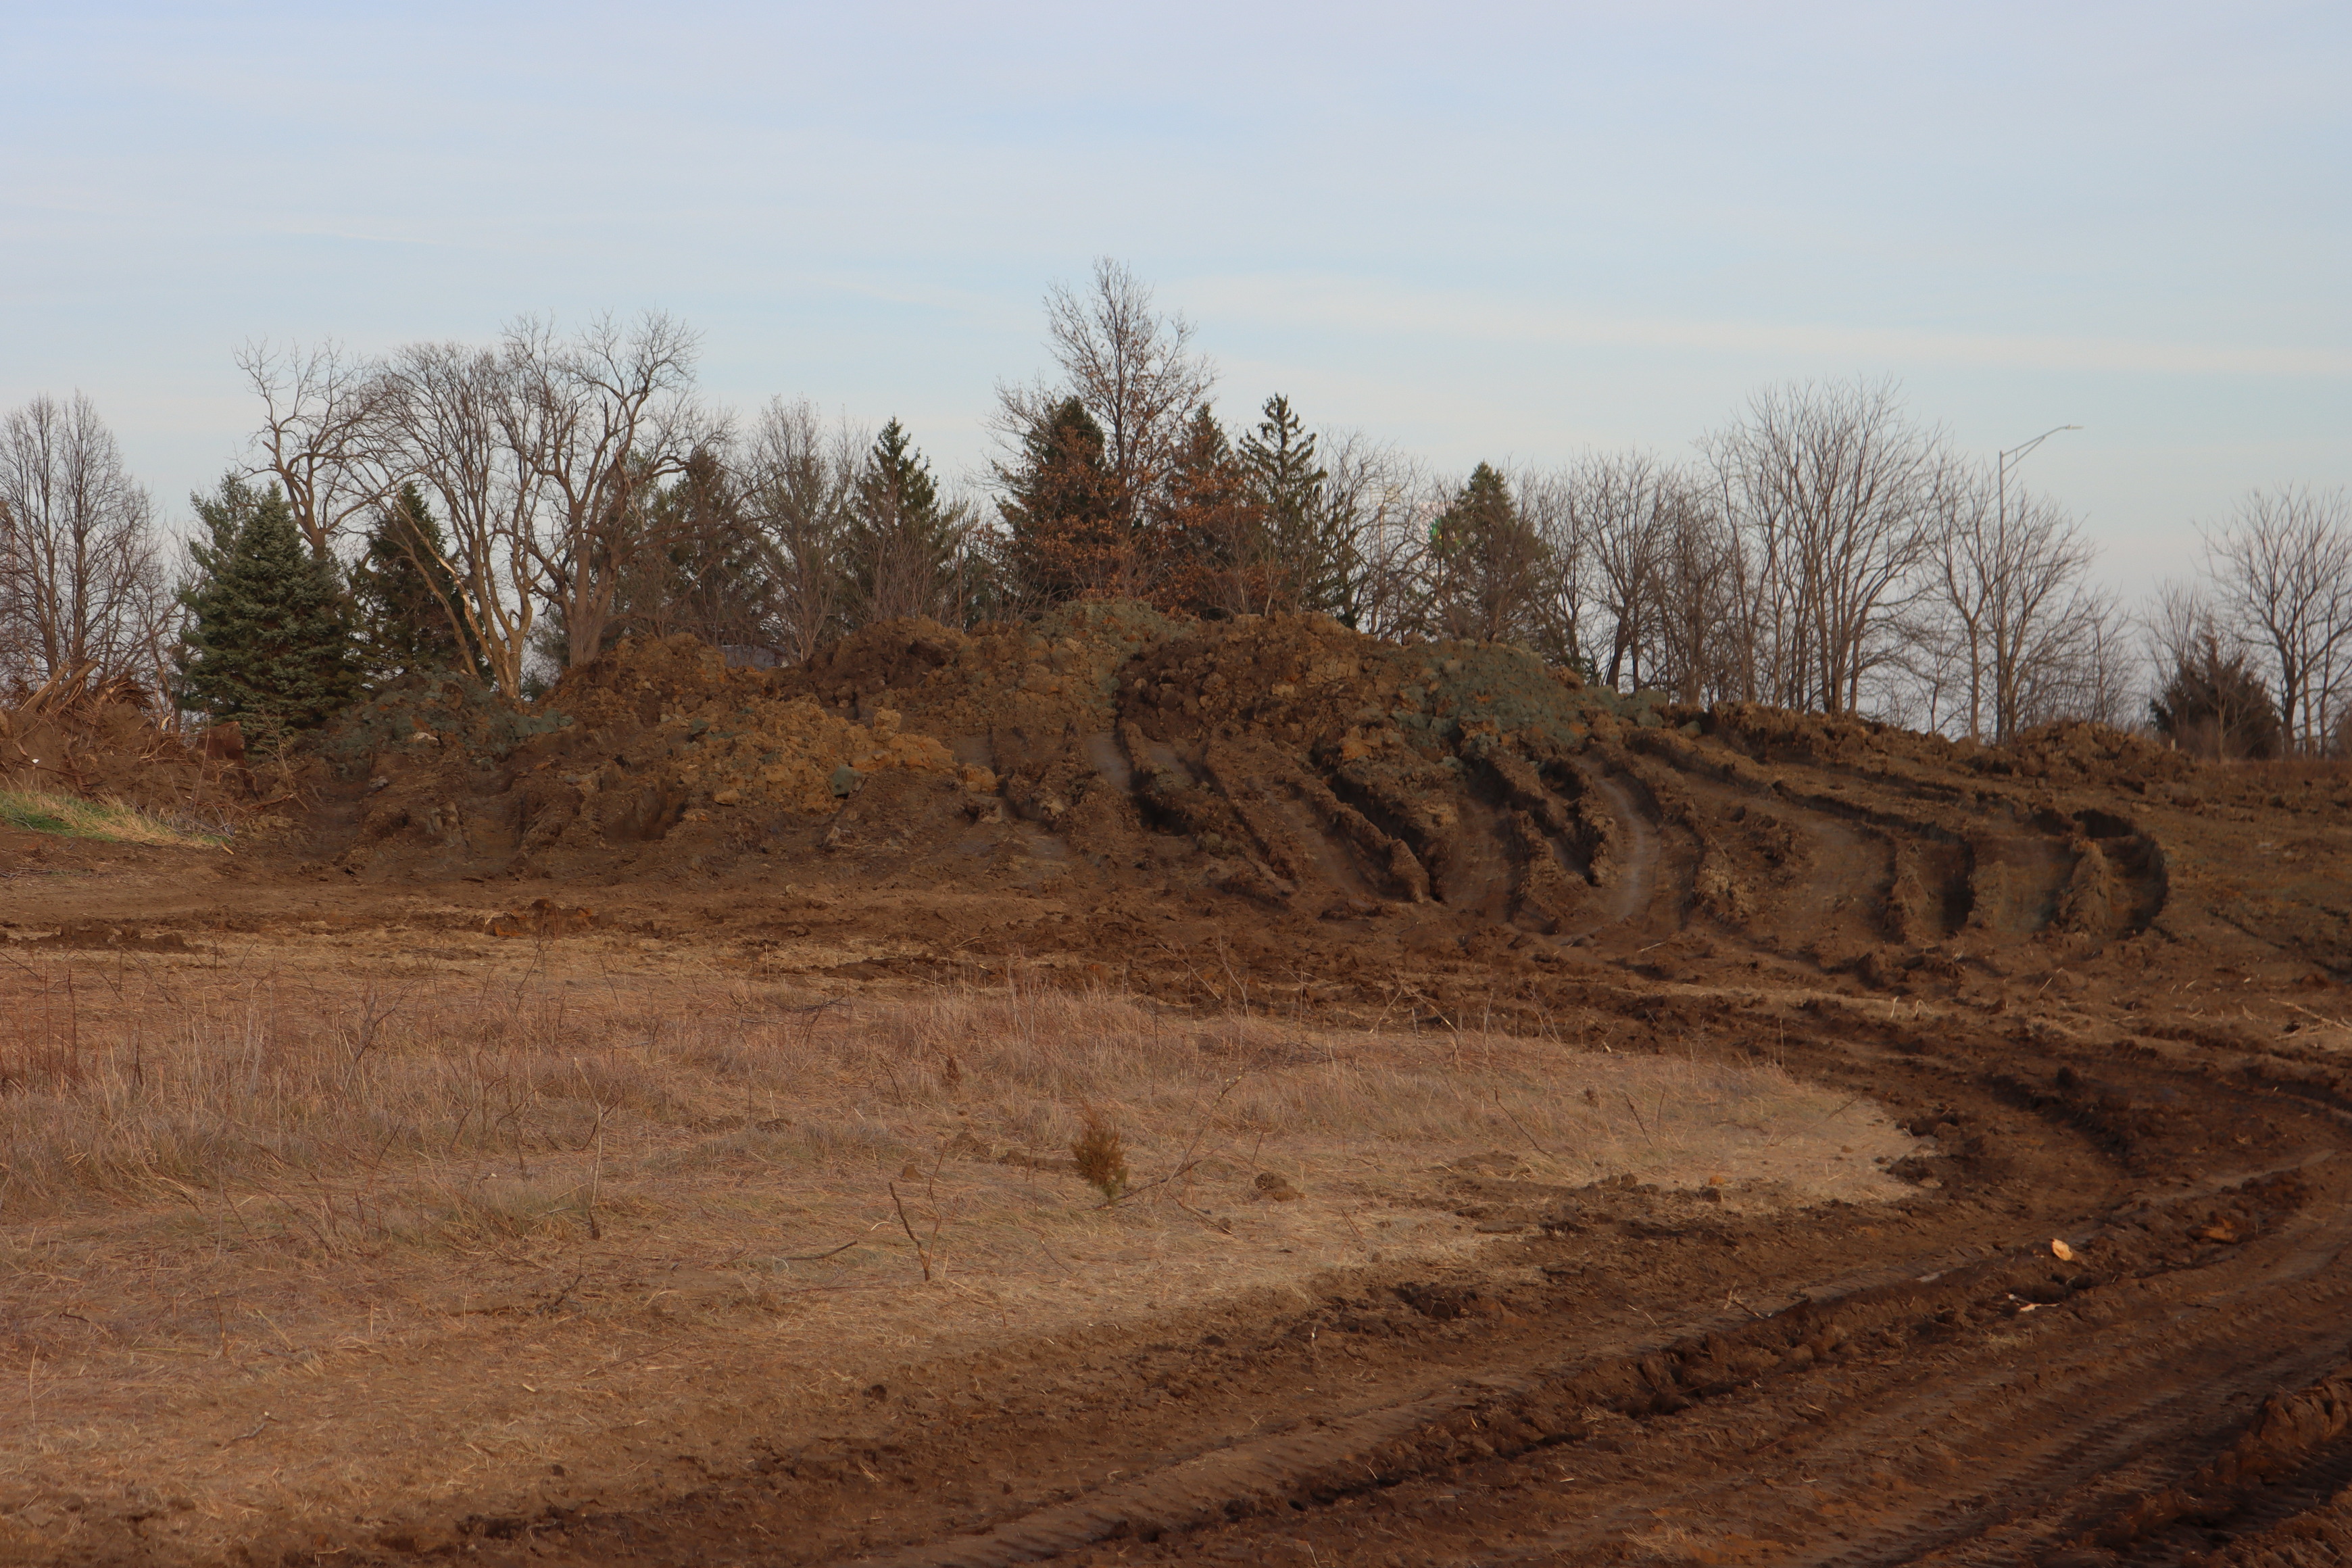 Large pile of dirt in center of image. Very deep tire tracks run up the side of the pile from dump trucks adding to berm.